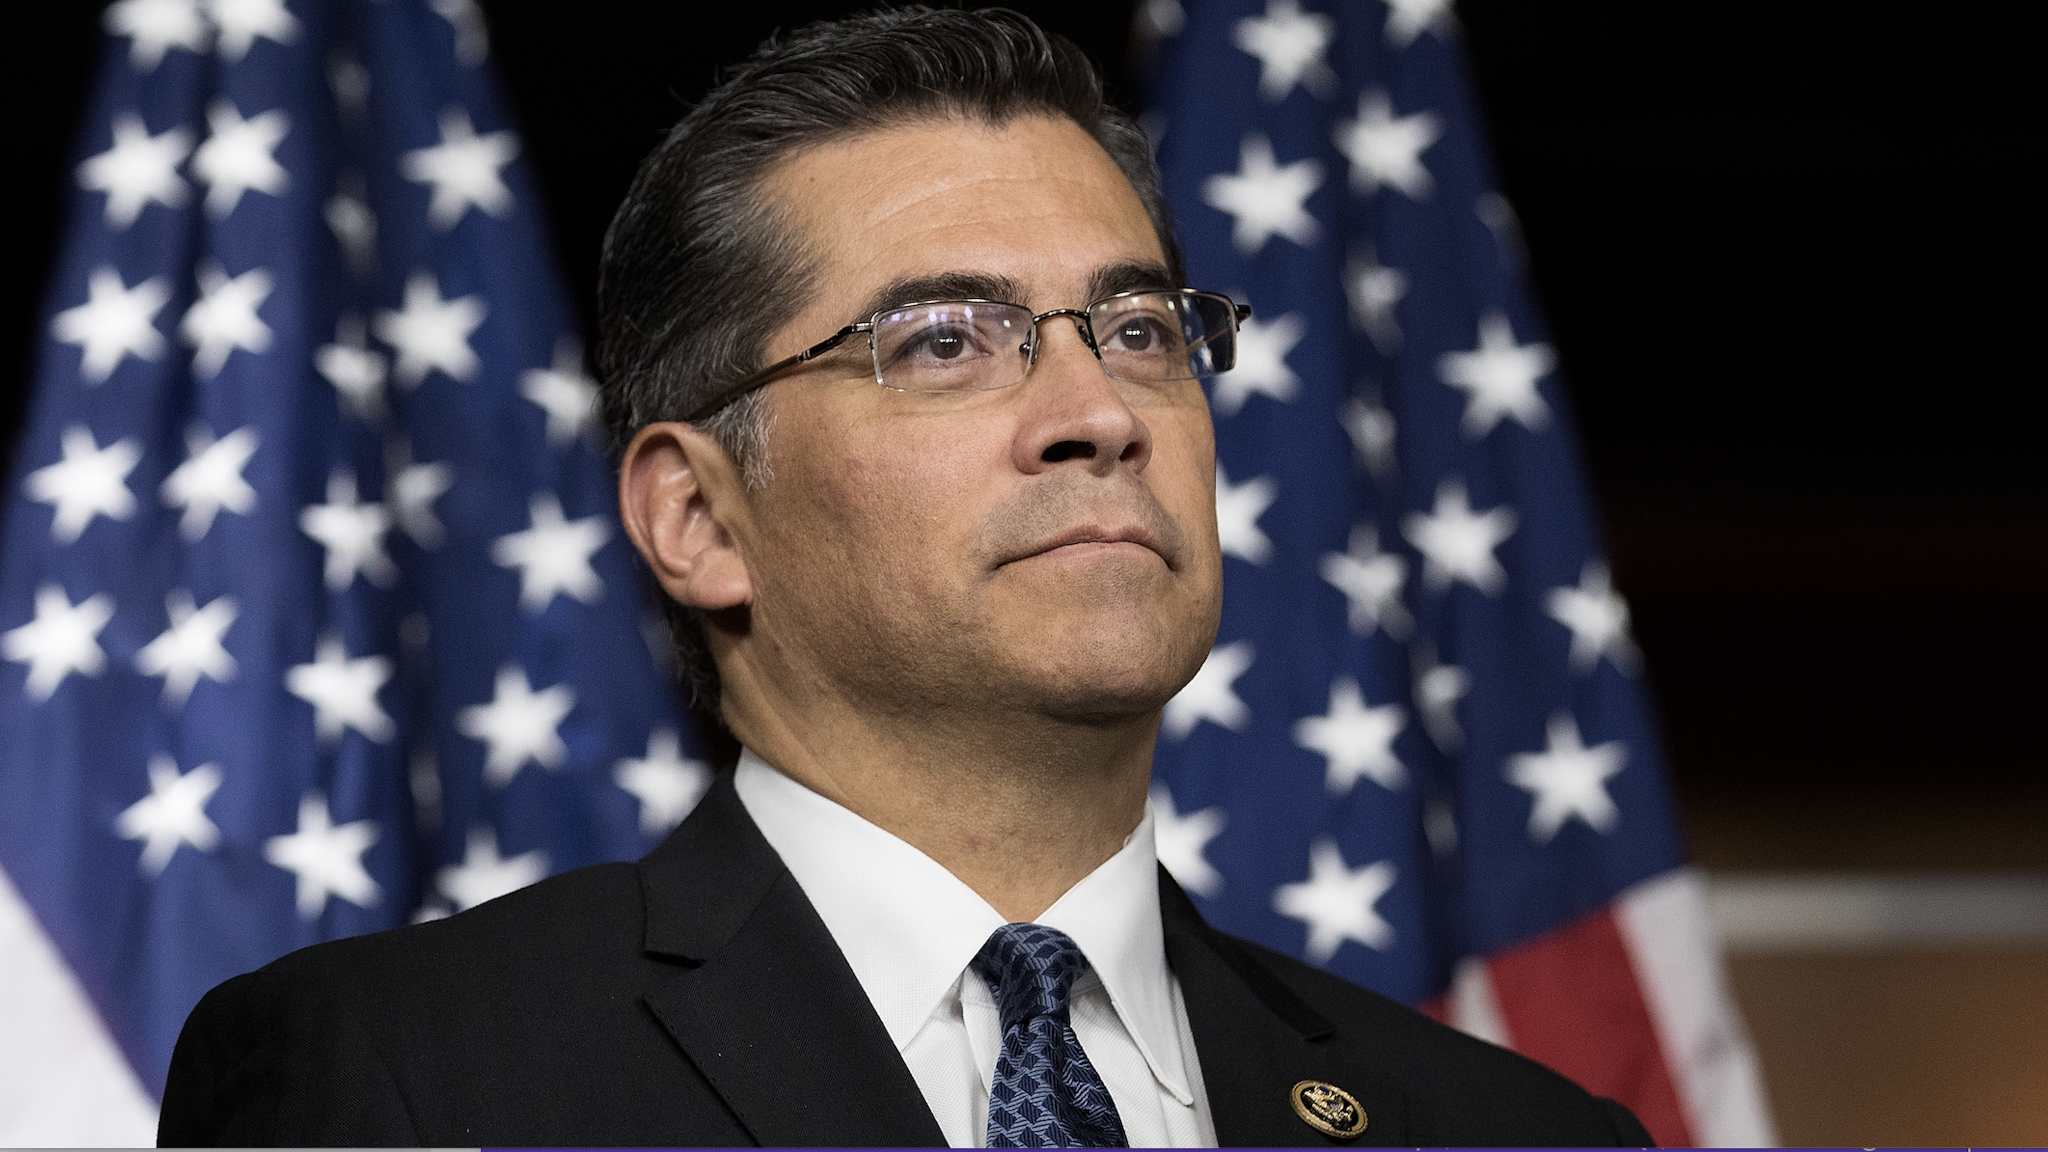 Rep. Xavier Becerra (D-CA) listens during a news conference to discuss the rhetoric of presidential candidate Donald Trump, at the U.S. Capitol, May 11, 2016, in Washington, DC.